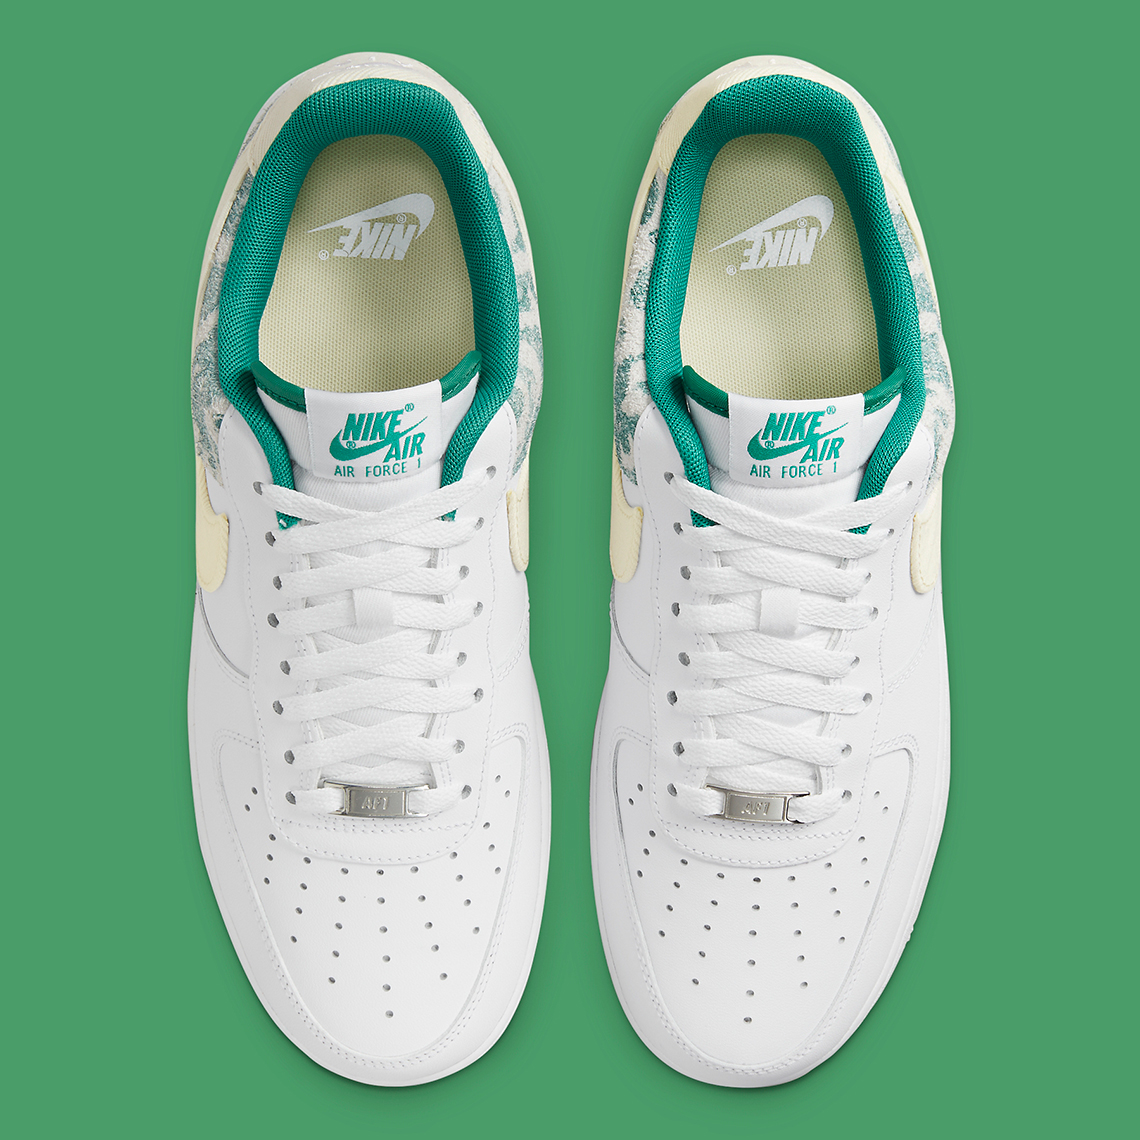 Nike Air Force 1 Low Sail Green Dx3365 100 7